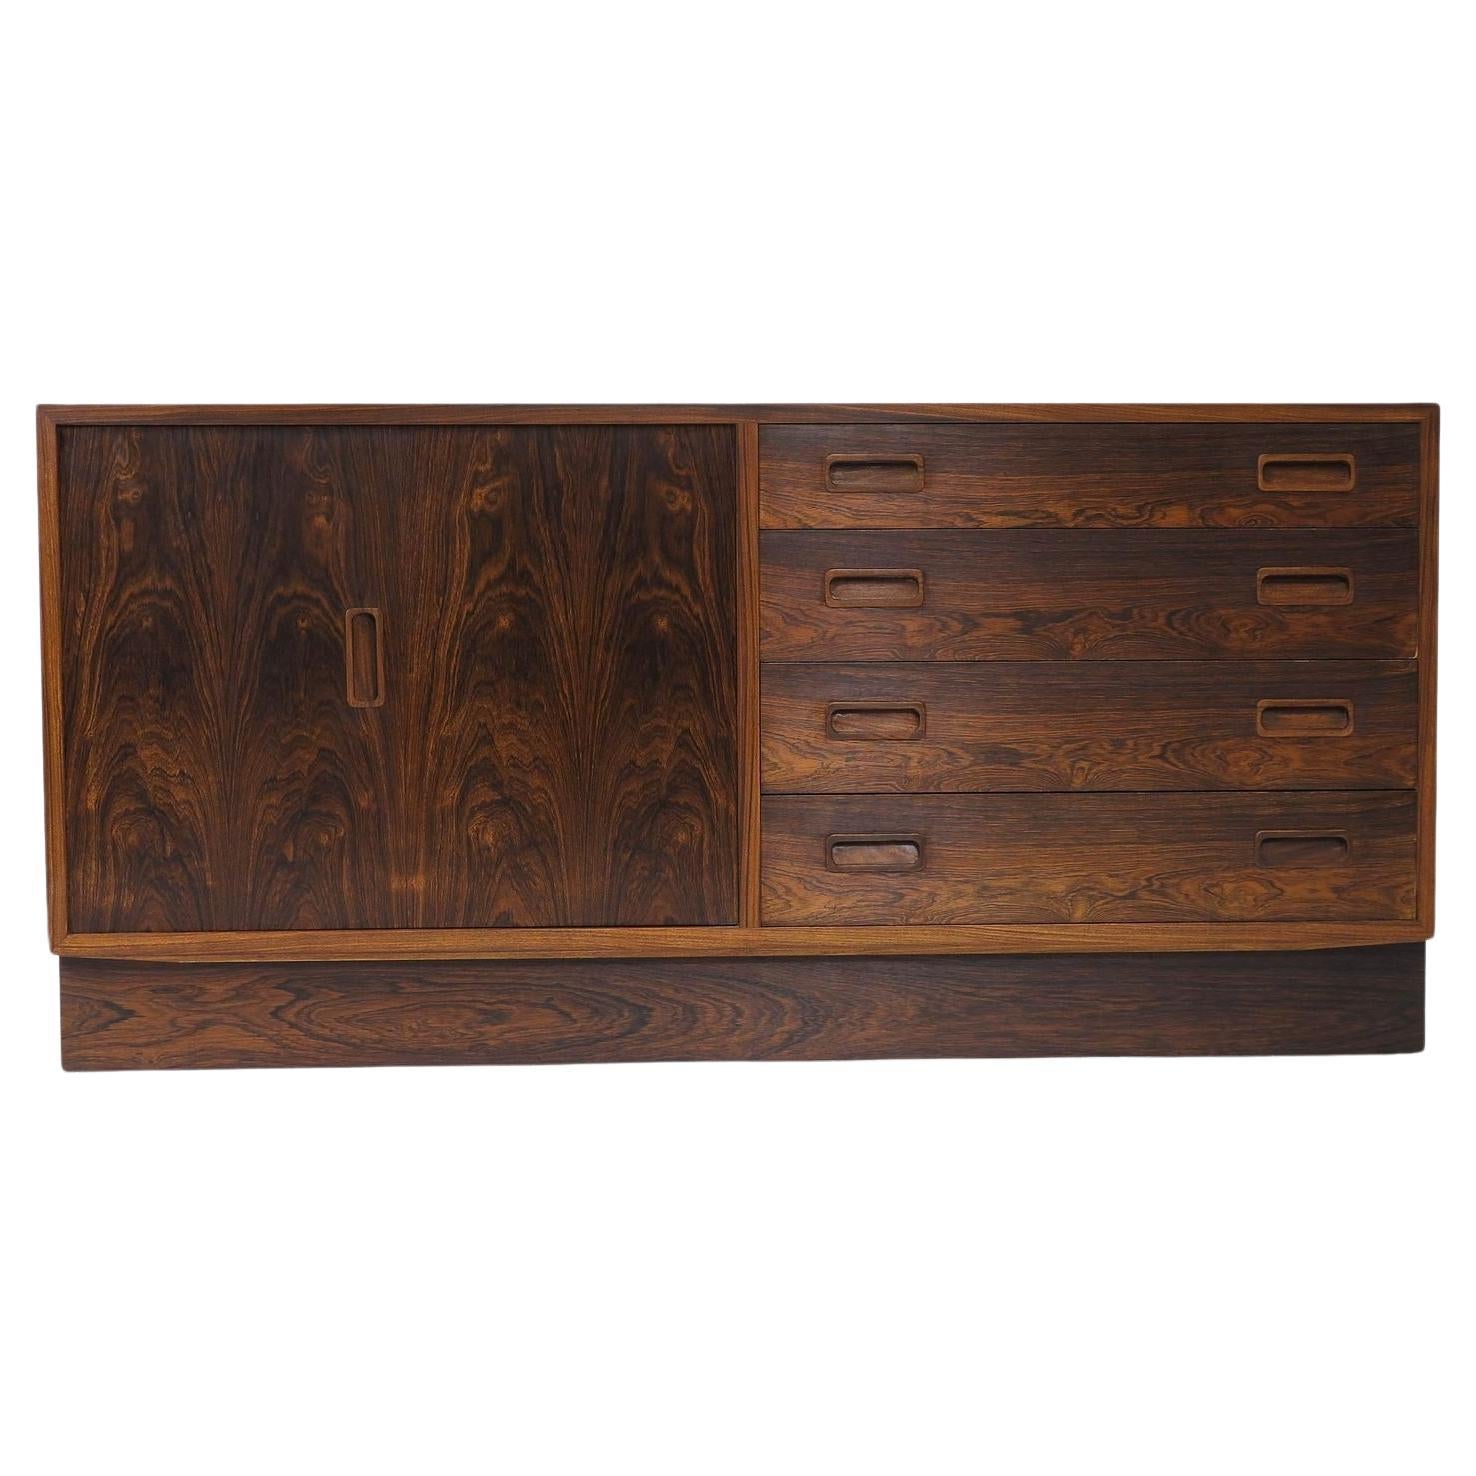 MId-century Danish Rosewood Bifold Low Sideboard For Sale